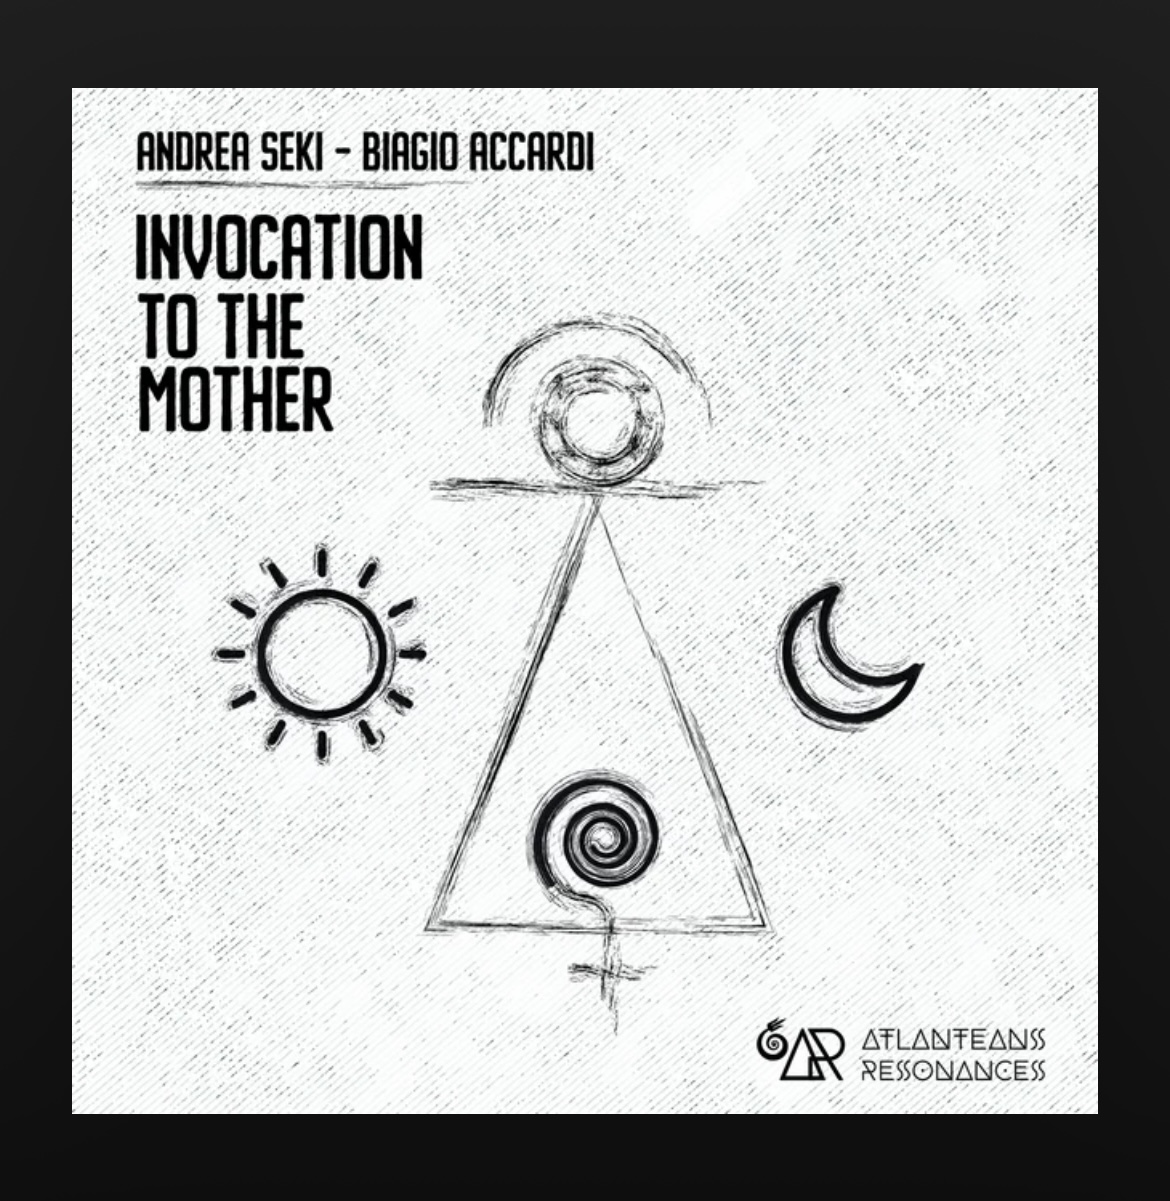 "Invocation to the Mother" (Atlanteans Resonances Records) the new single track by Biagio Accardi & Andrea Seki.